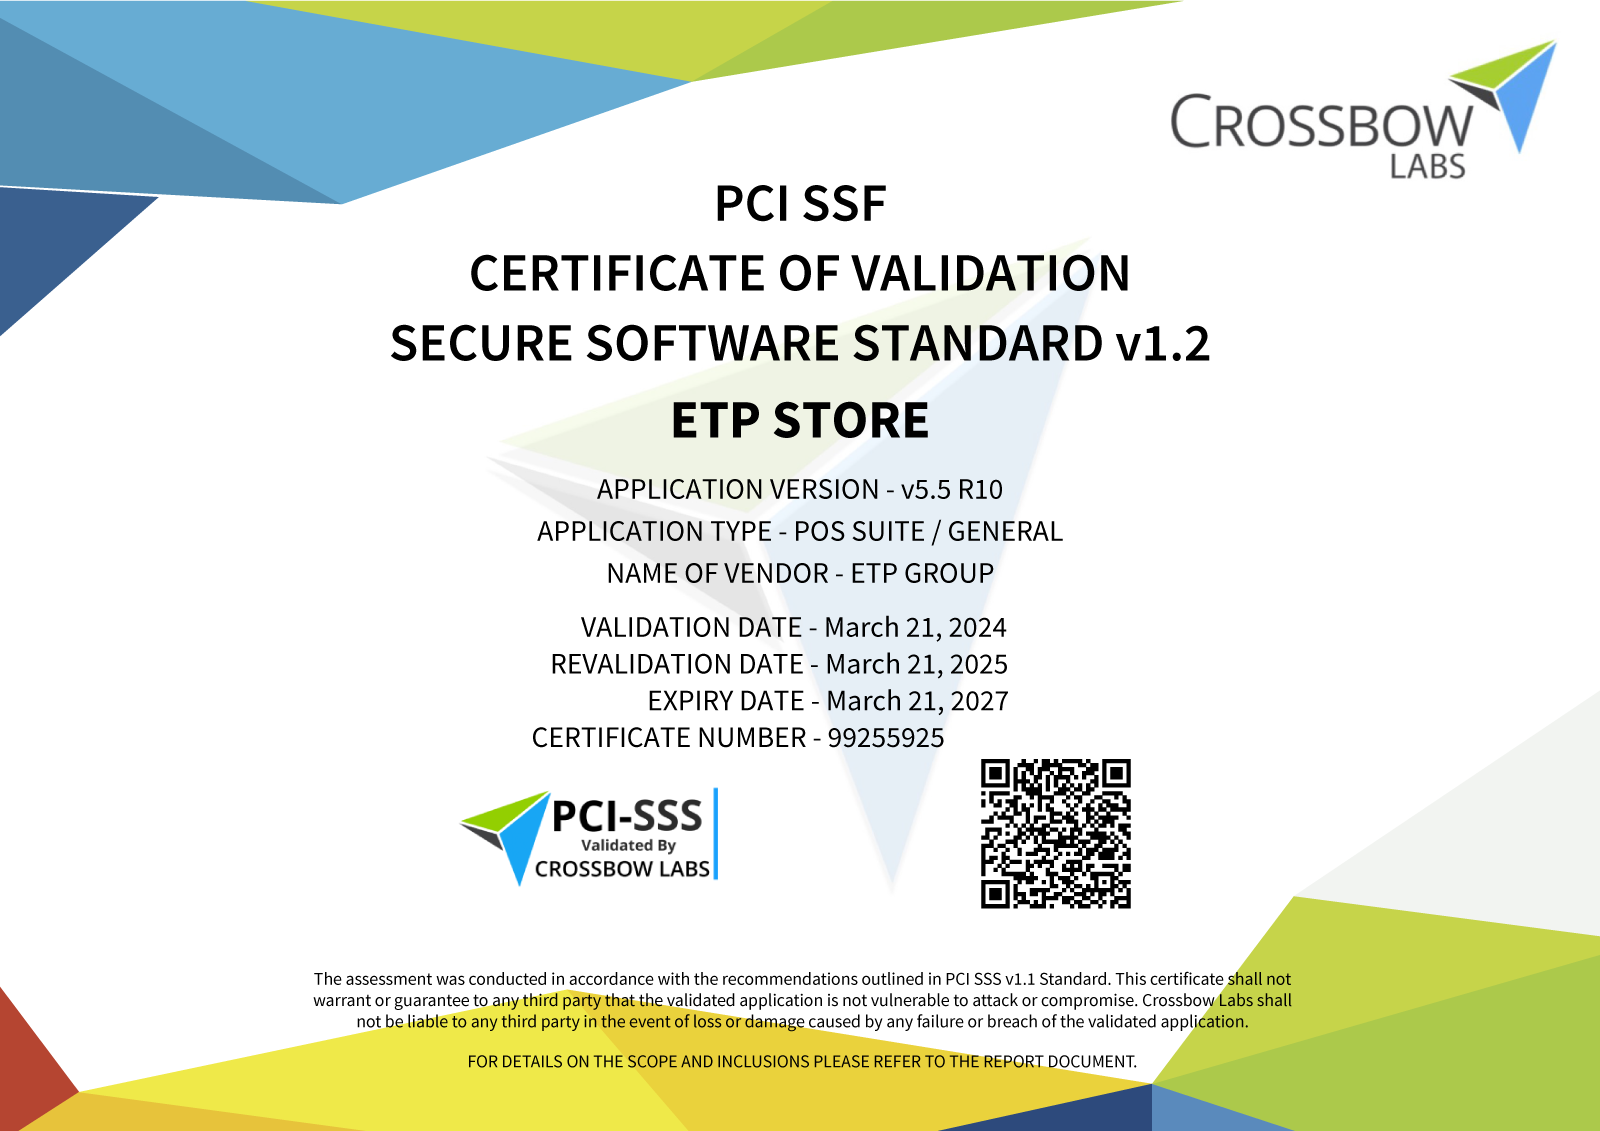 ETP Store has been assessed by Crossbow Labs LLP and has been found to be validated with PCI SSF v1.2 as set out by PCI Security Standard Council